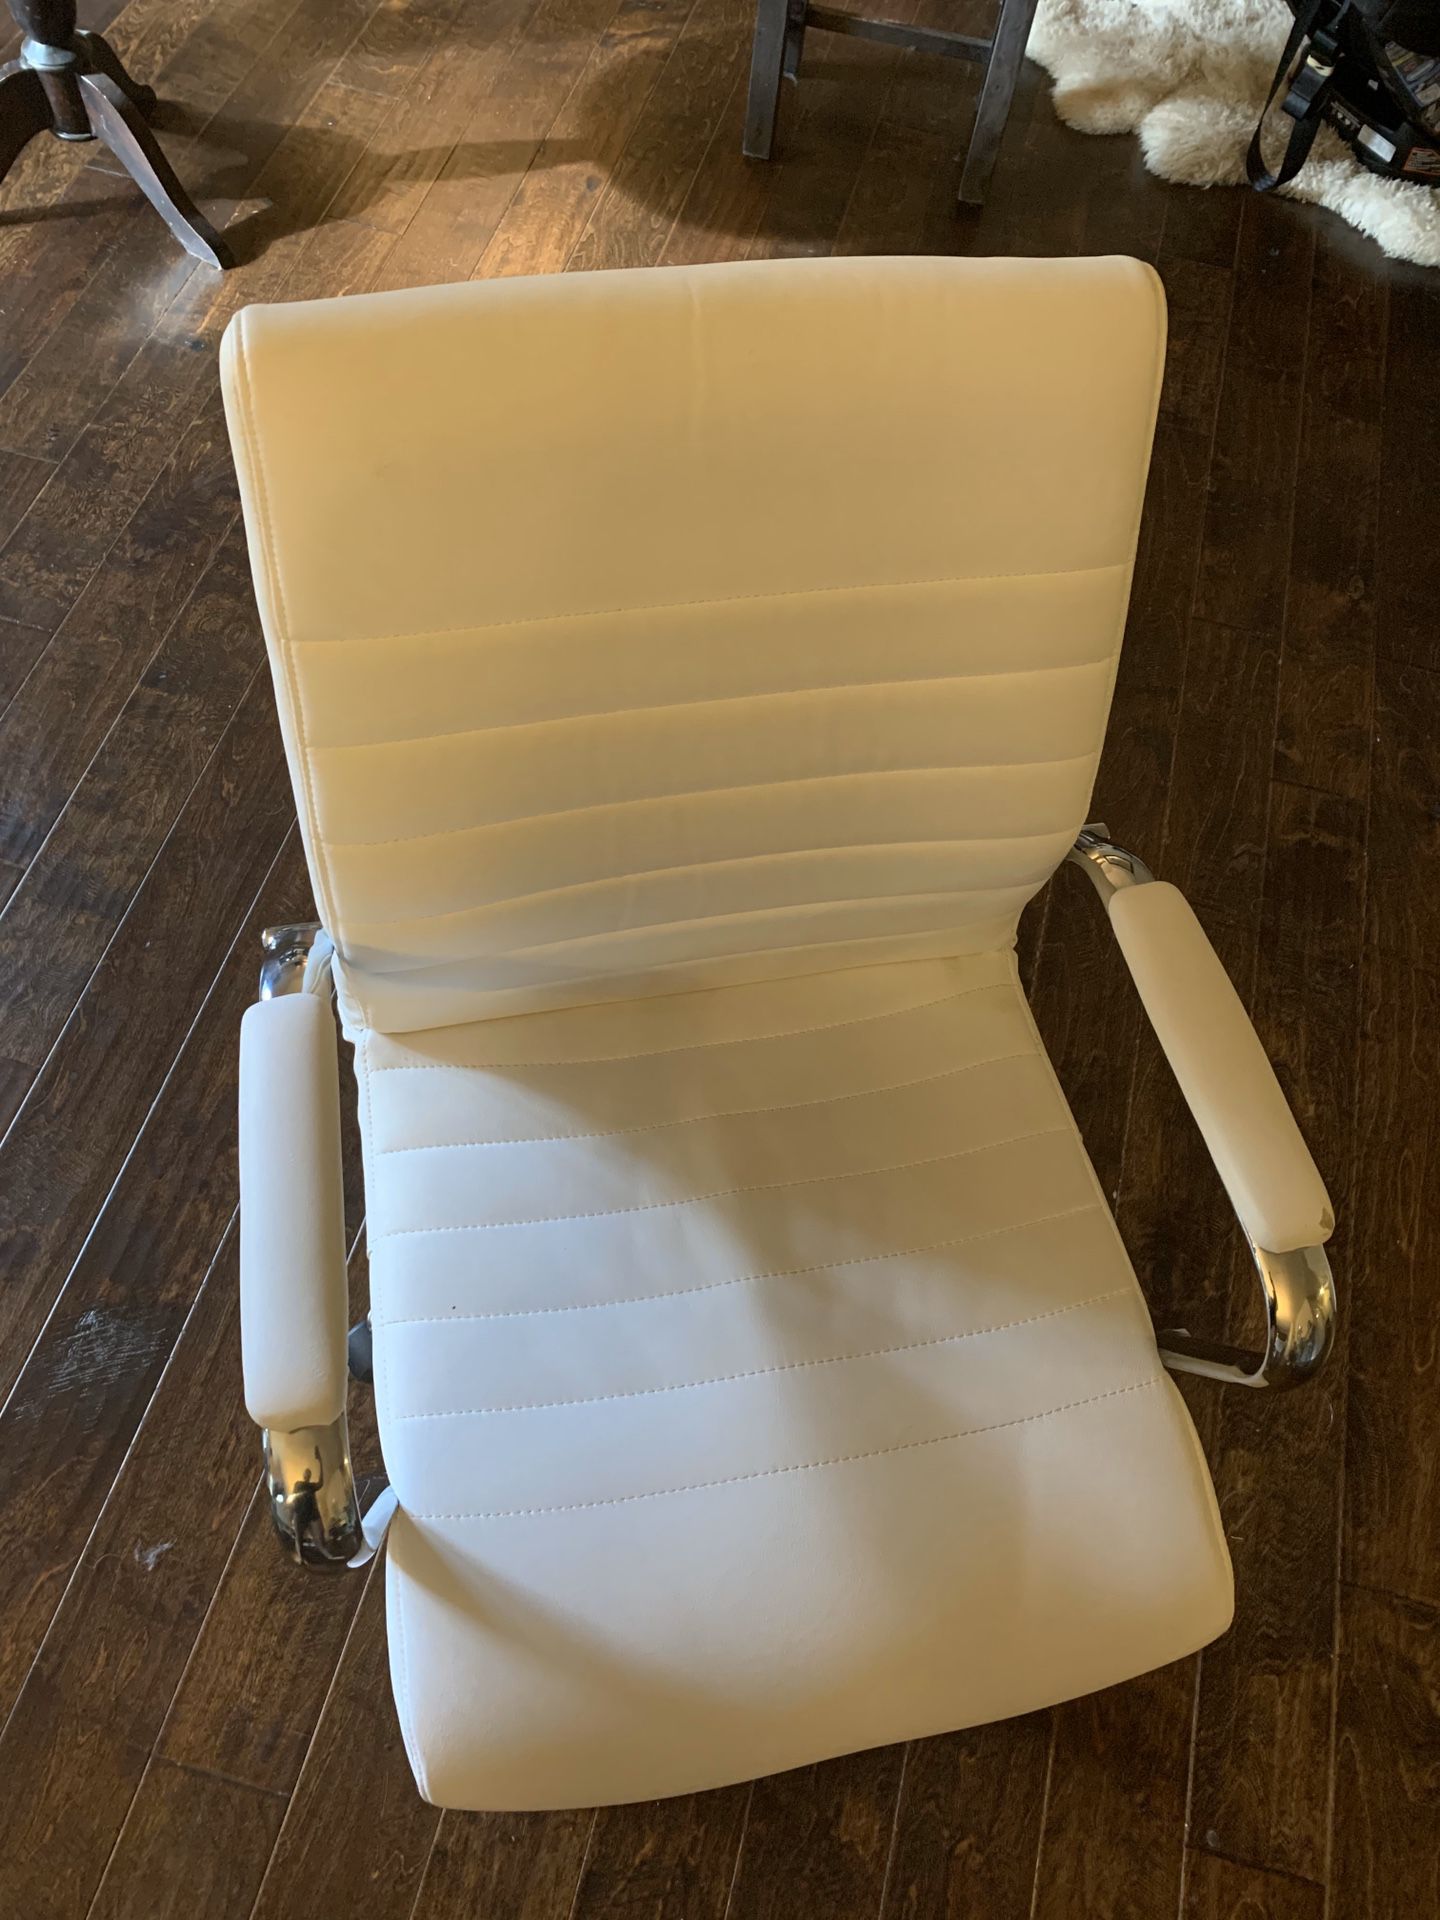 White leather office chair